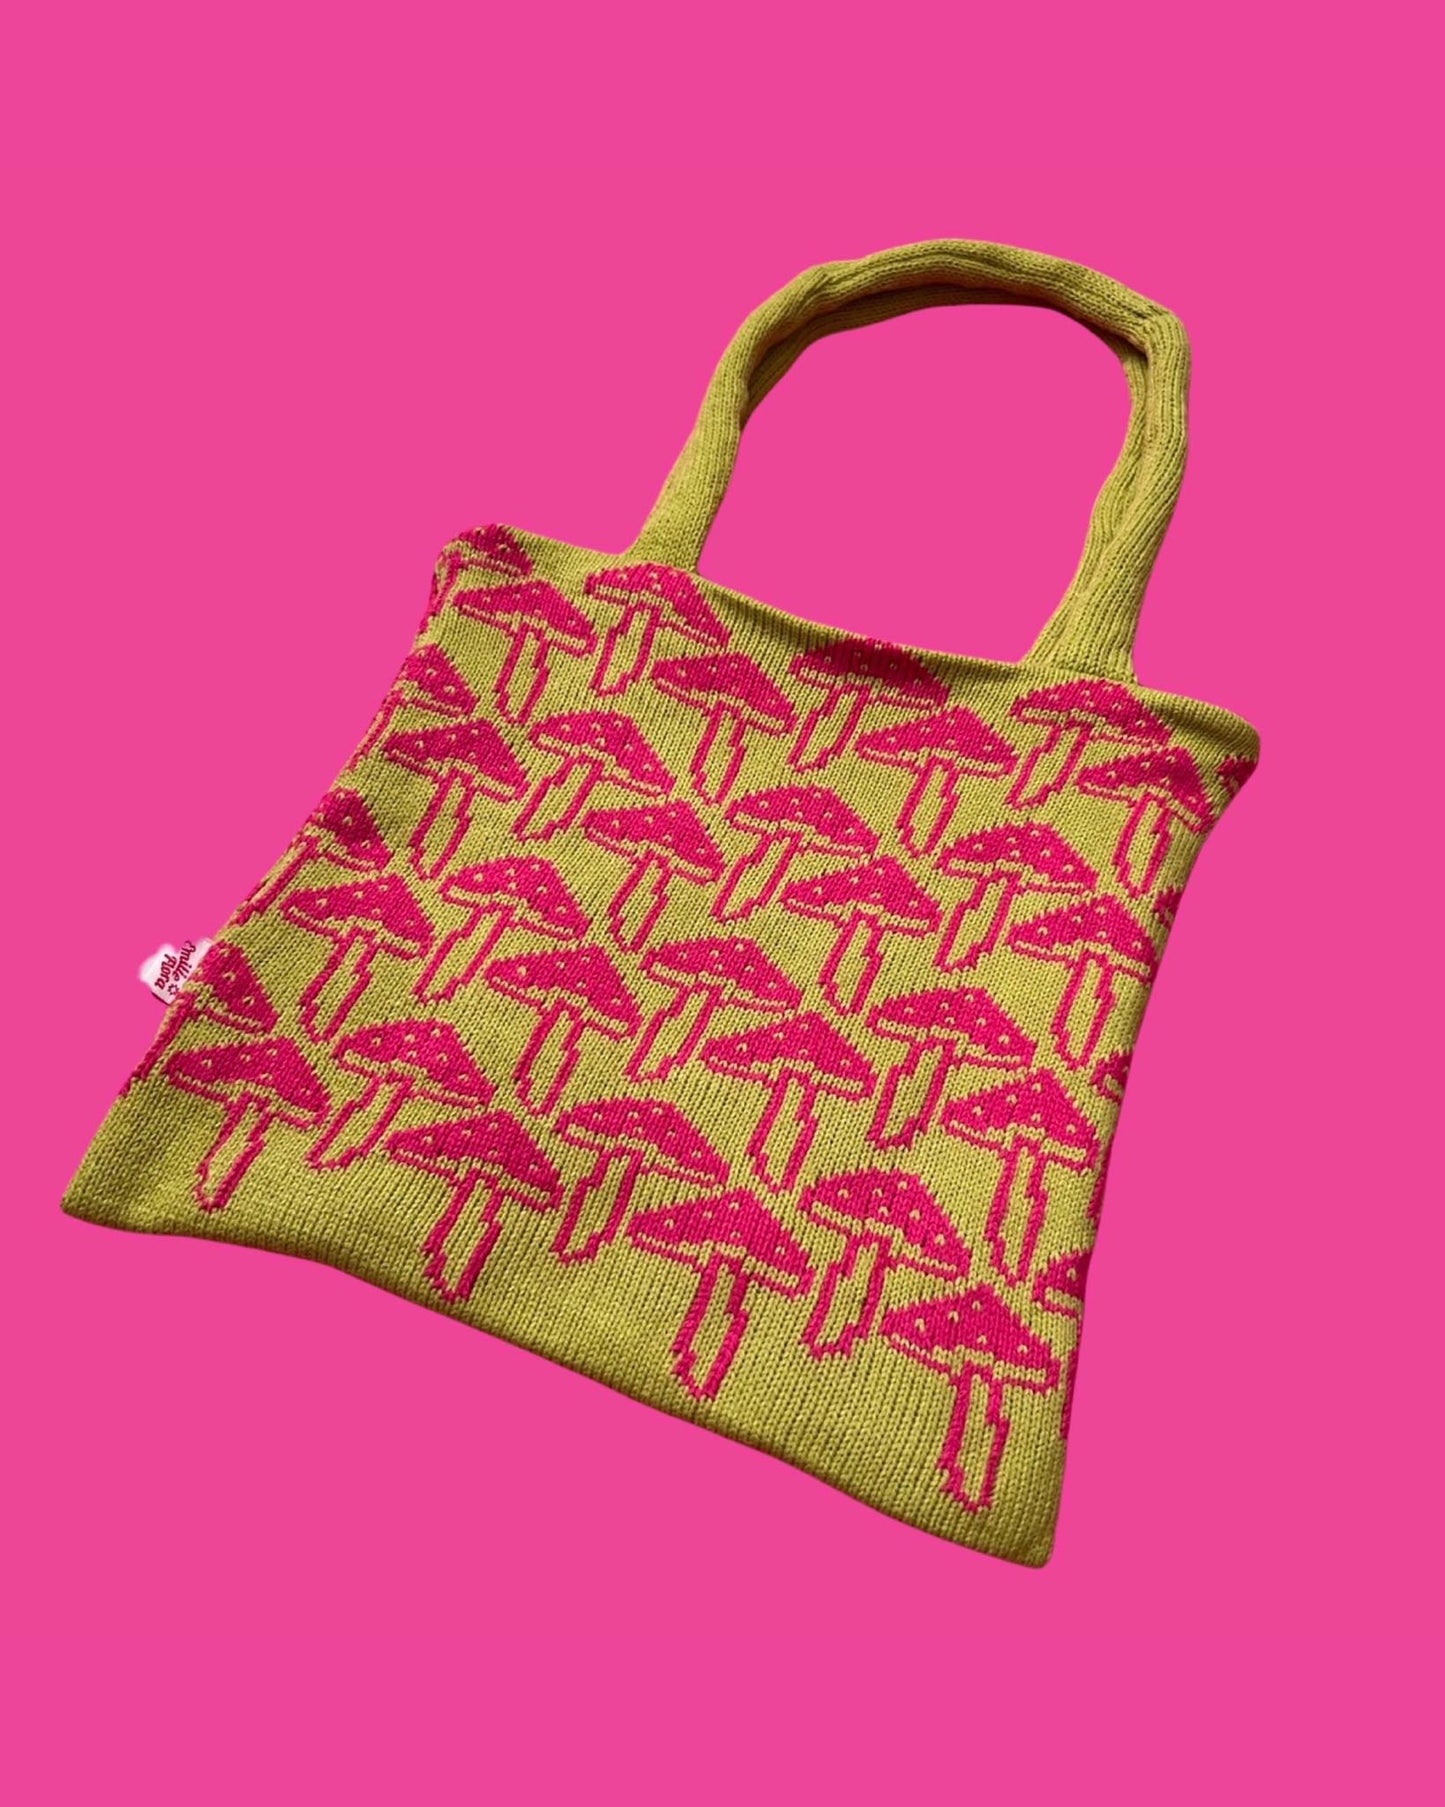 Tote Bag - Mushroom, Lime and Hot Pink - READY TO SHIP